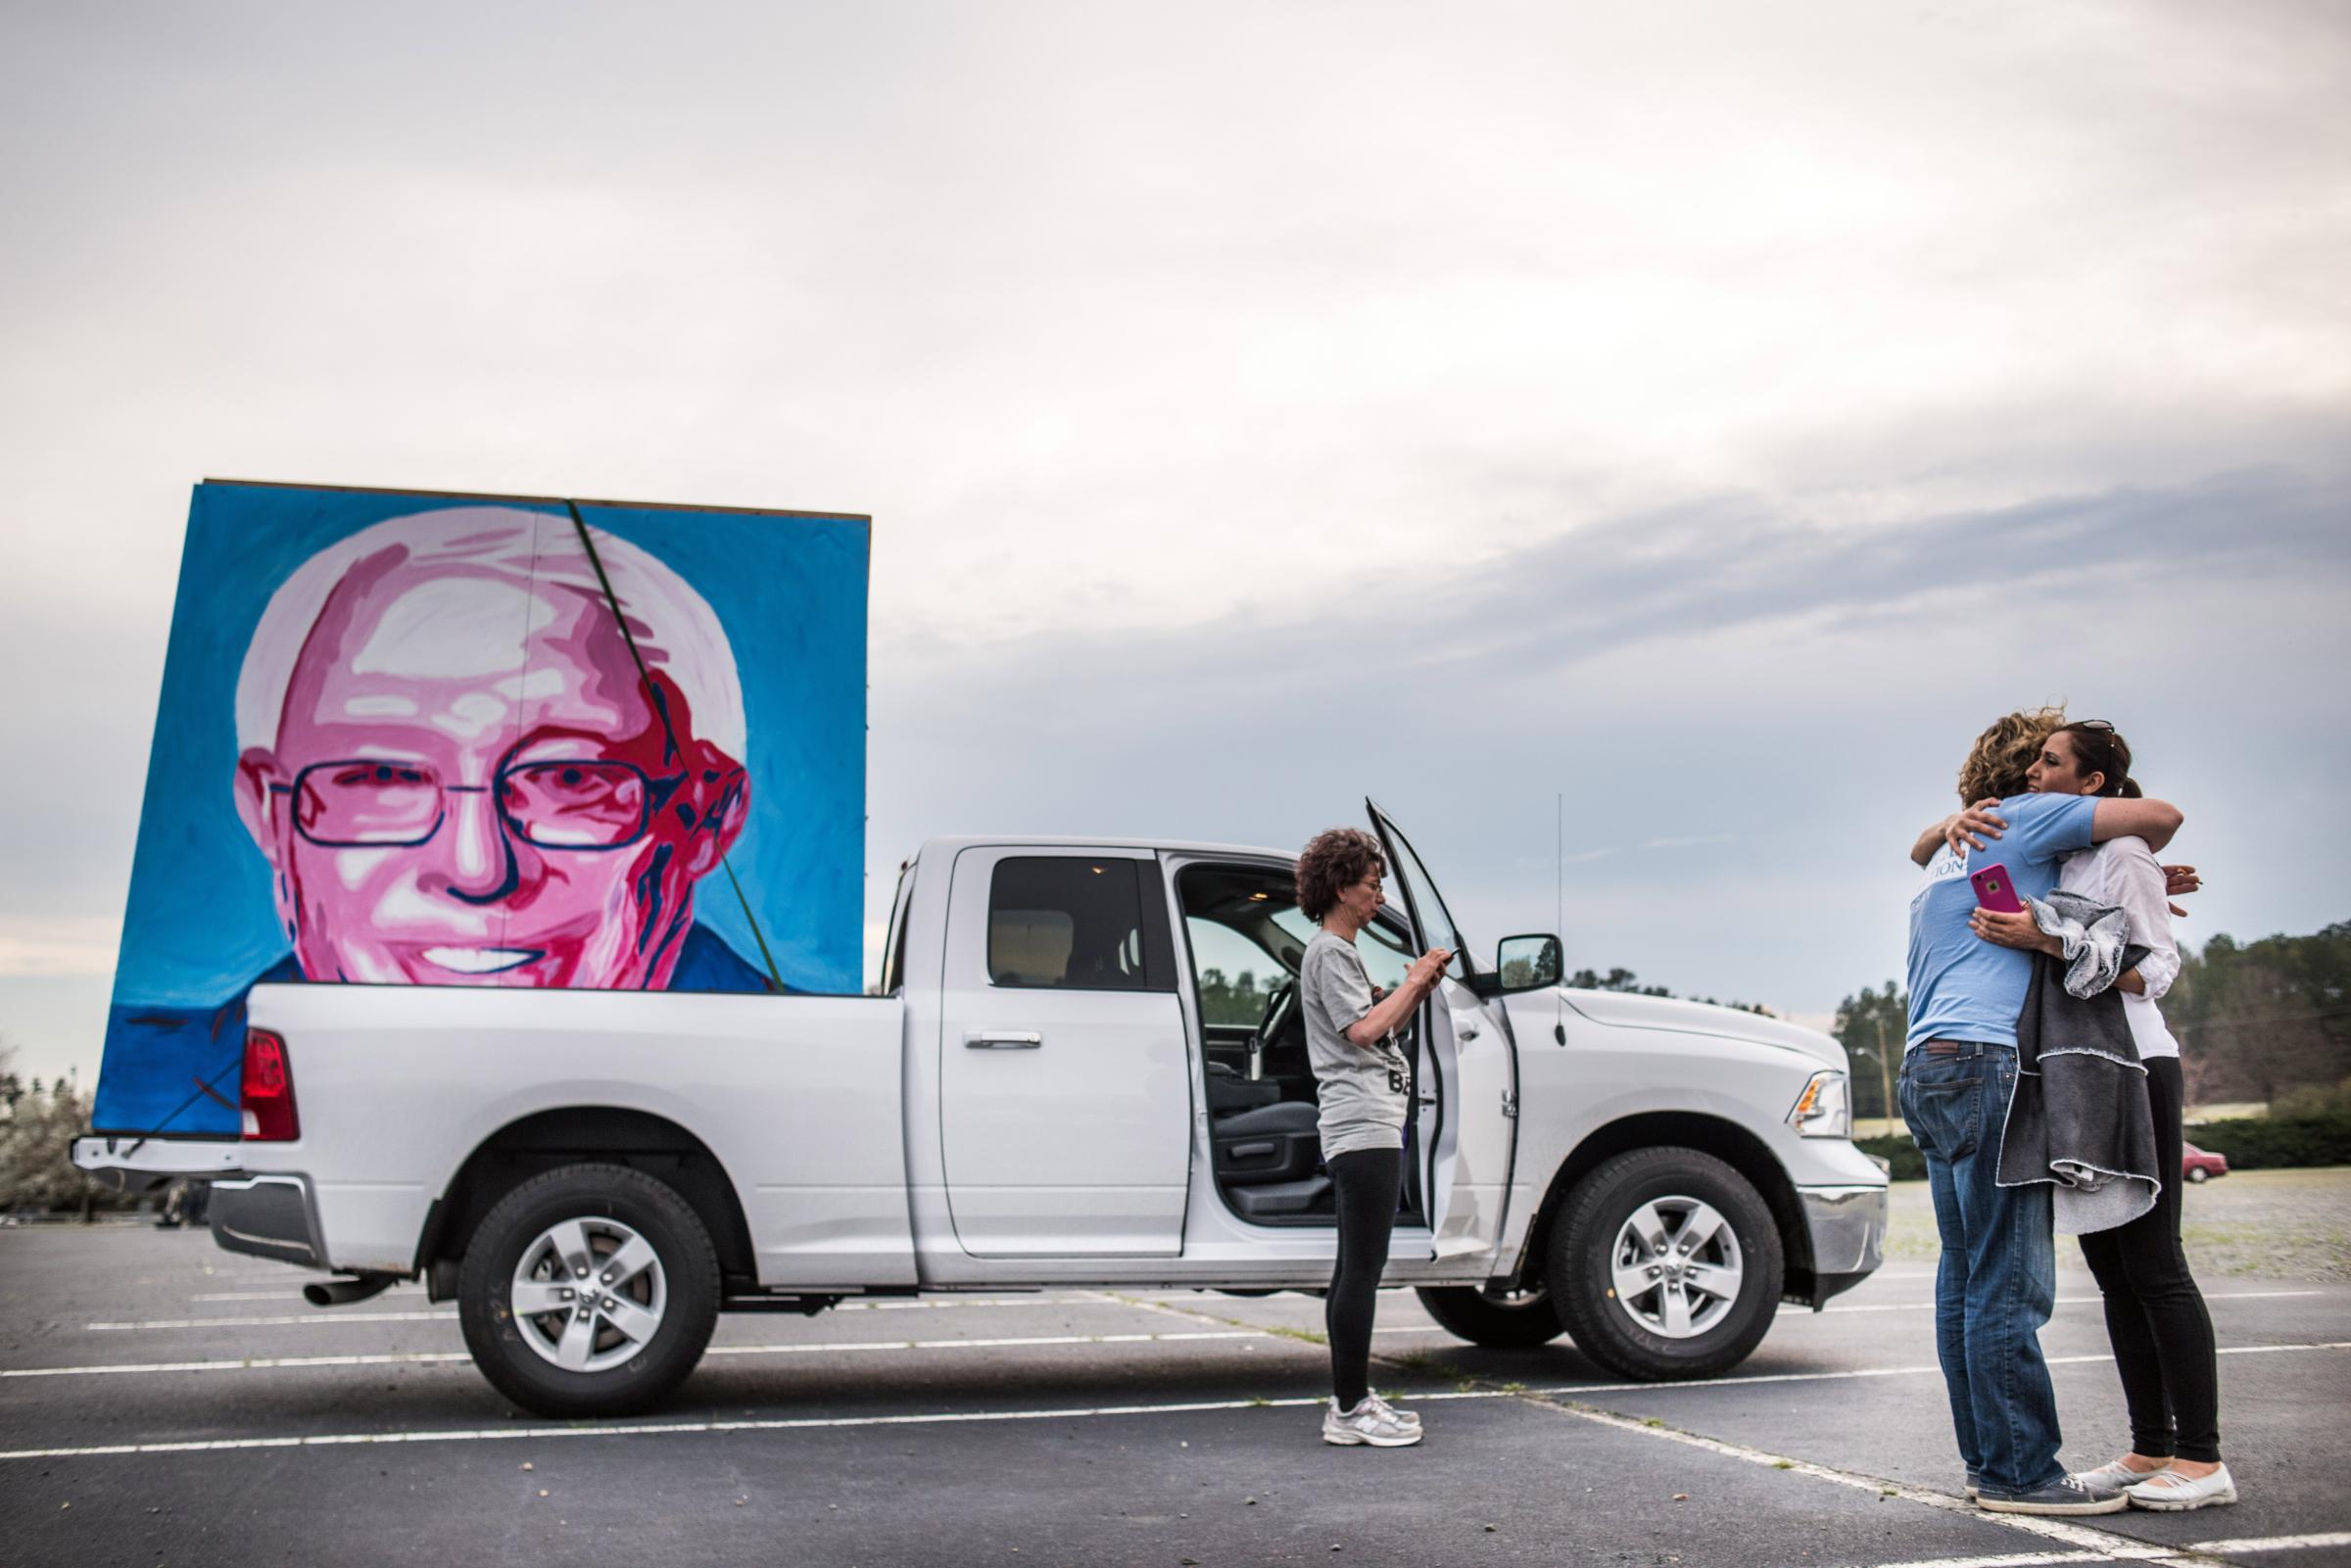 Joseph Kelly, left, hugs Farzaneh Rezaei after loading his large painting showing the likeness of Bernie Sanders into a truck following a campaign rally on March 14 in Charlotte, N.C.